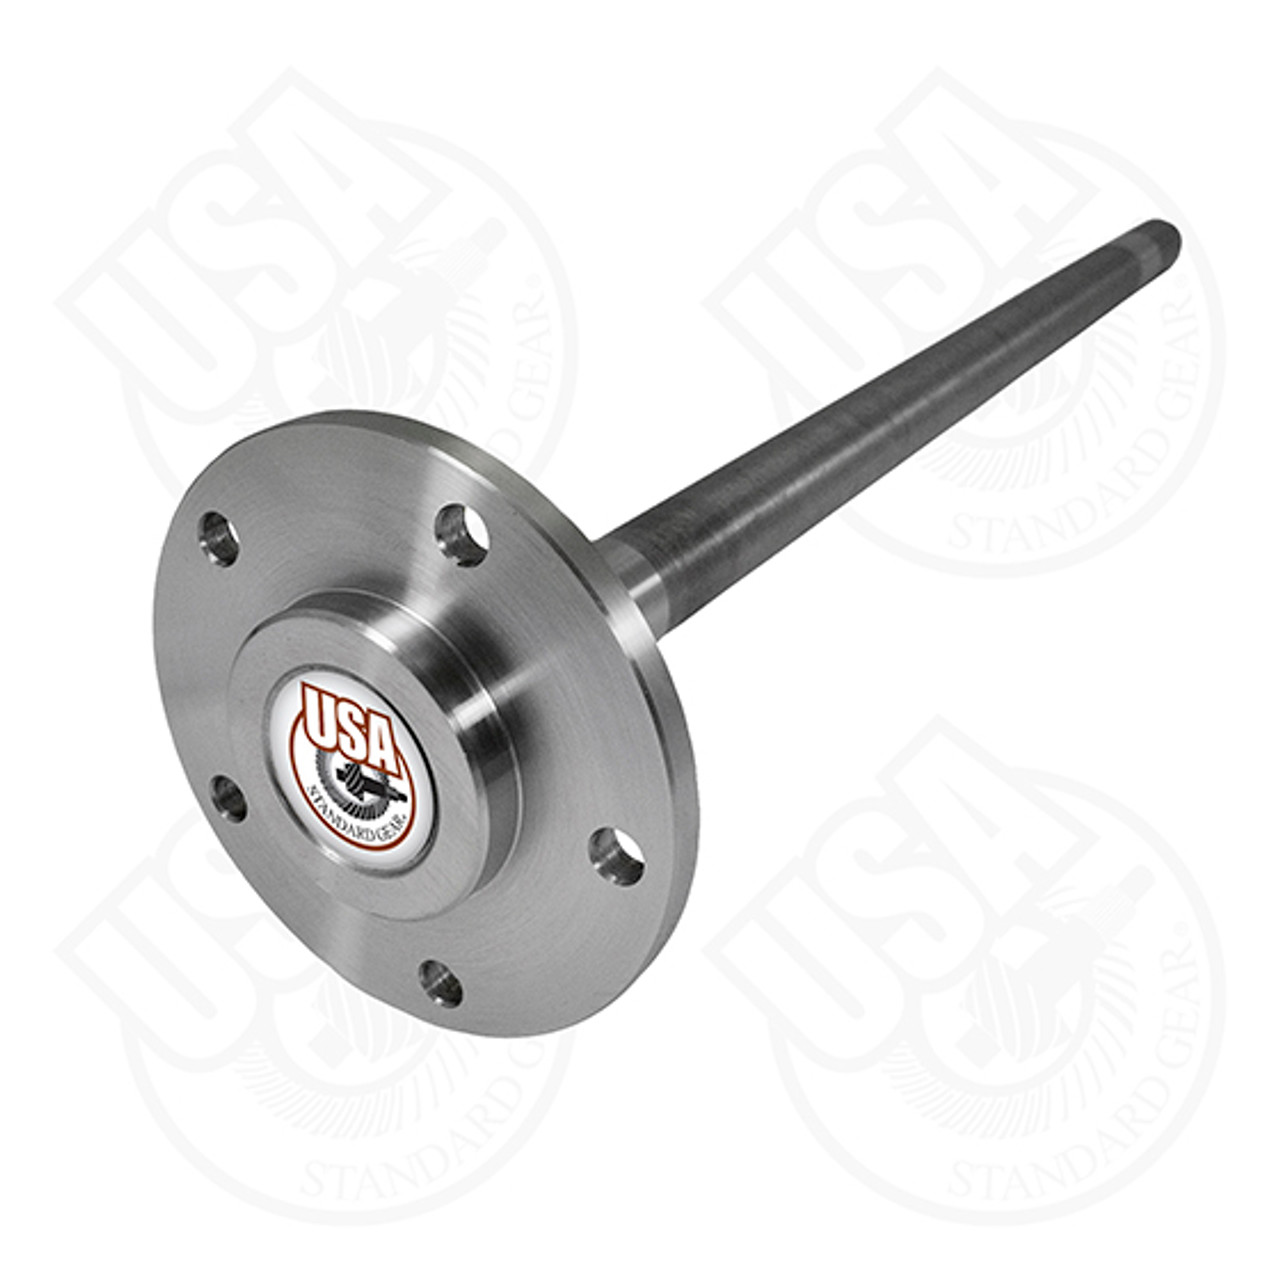 USA Standard 1541H alloy rear axle for 8.5" GM 2WD C10 truck